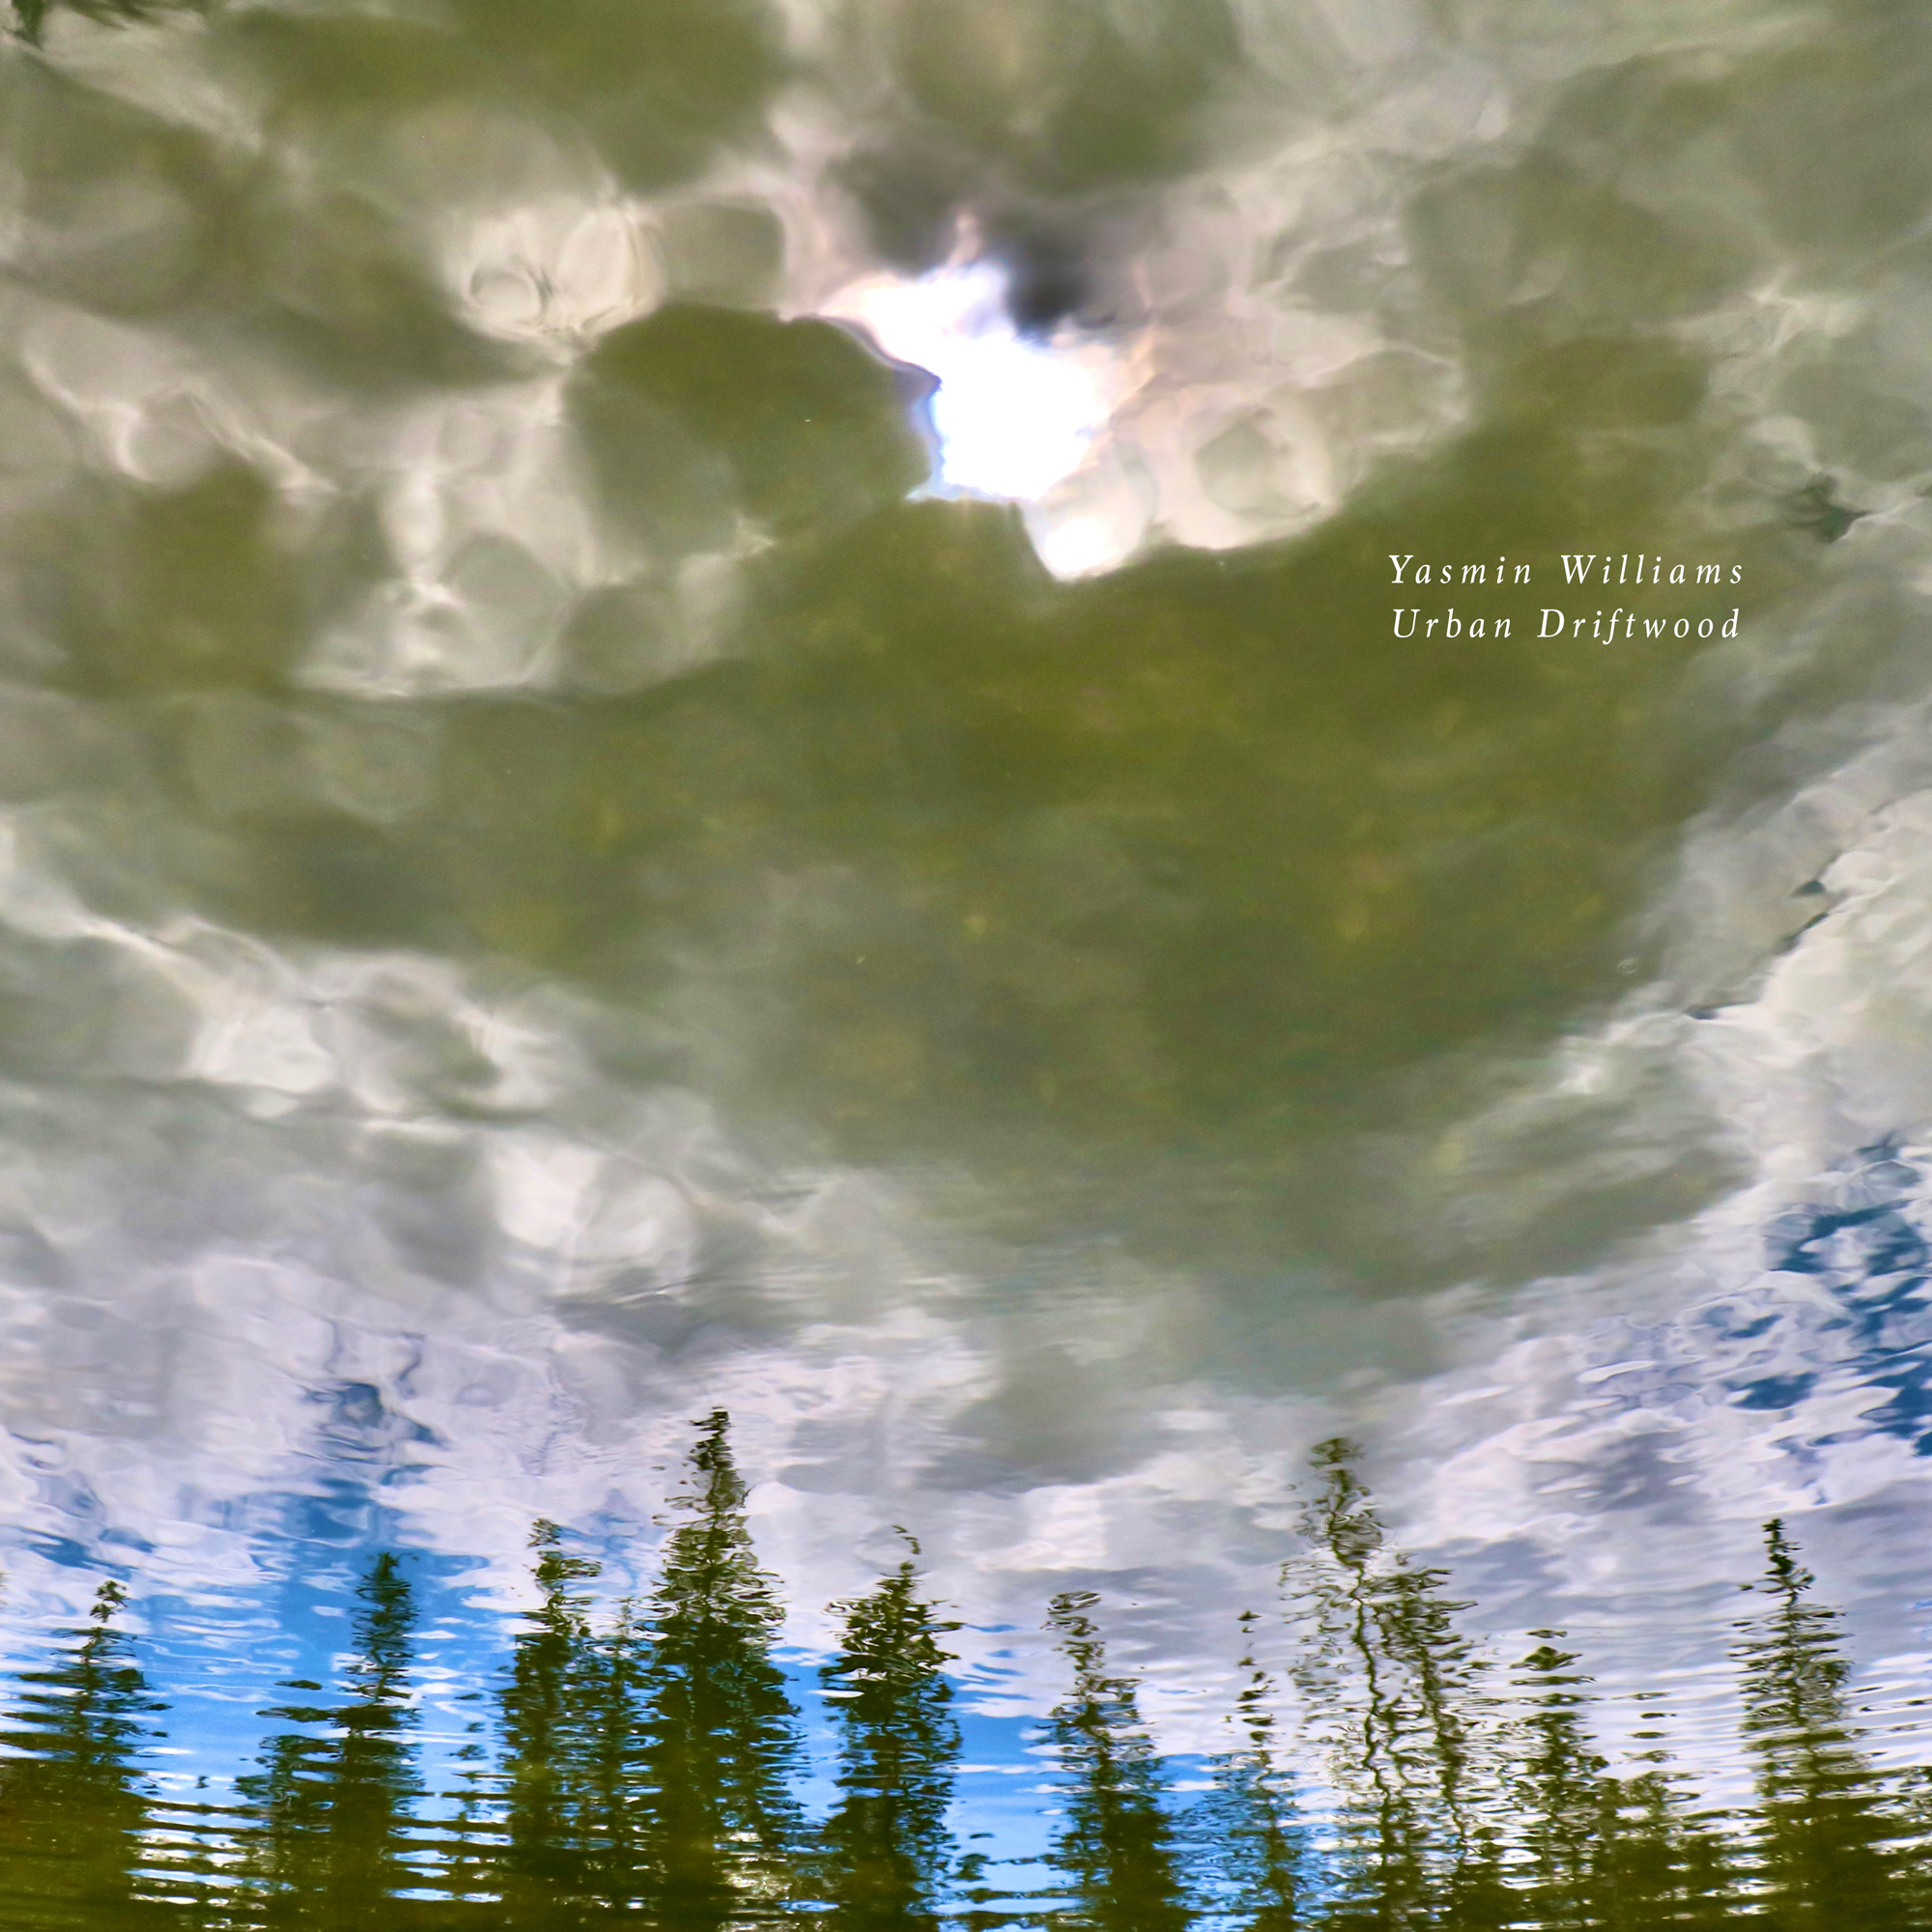 yasmin williams urban driftwood cover art - a photograph of a reflection of trees and clouds on water